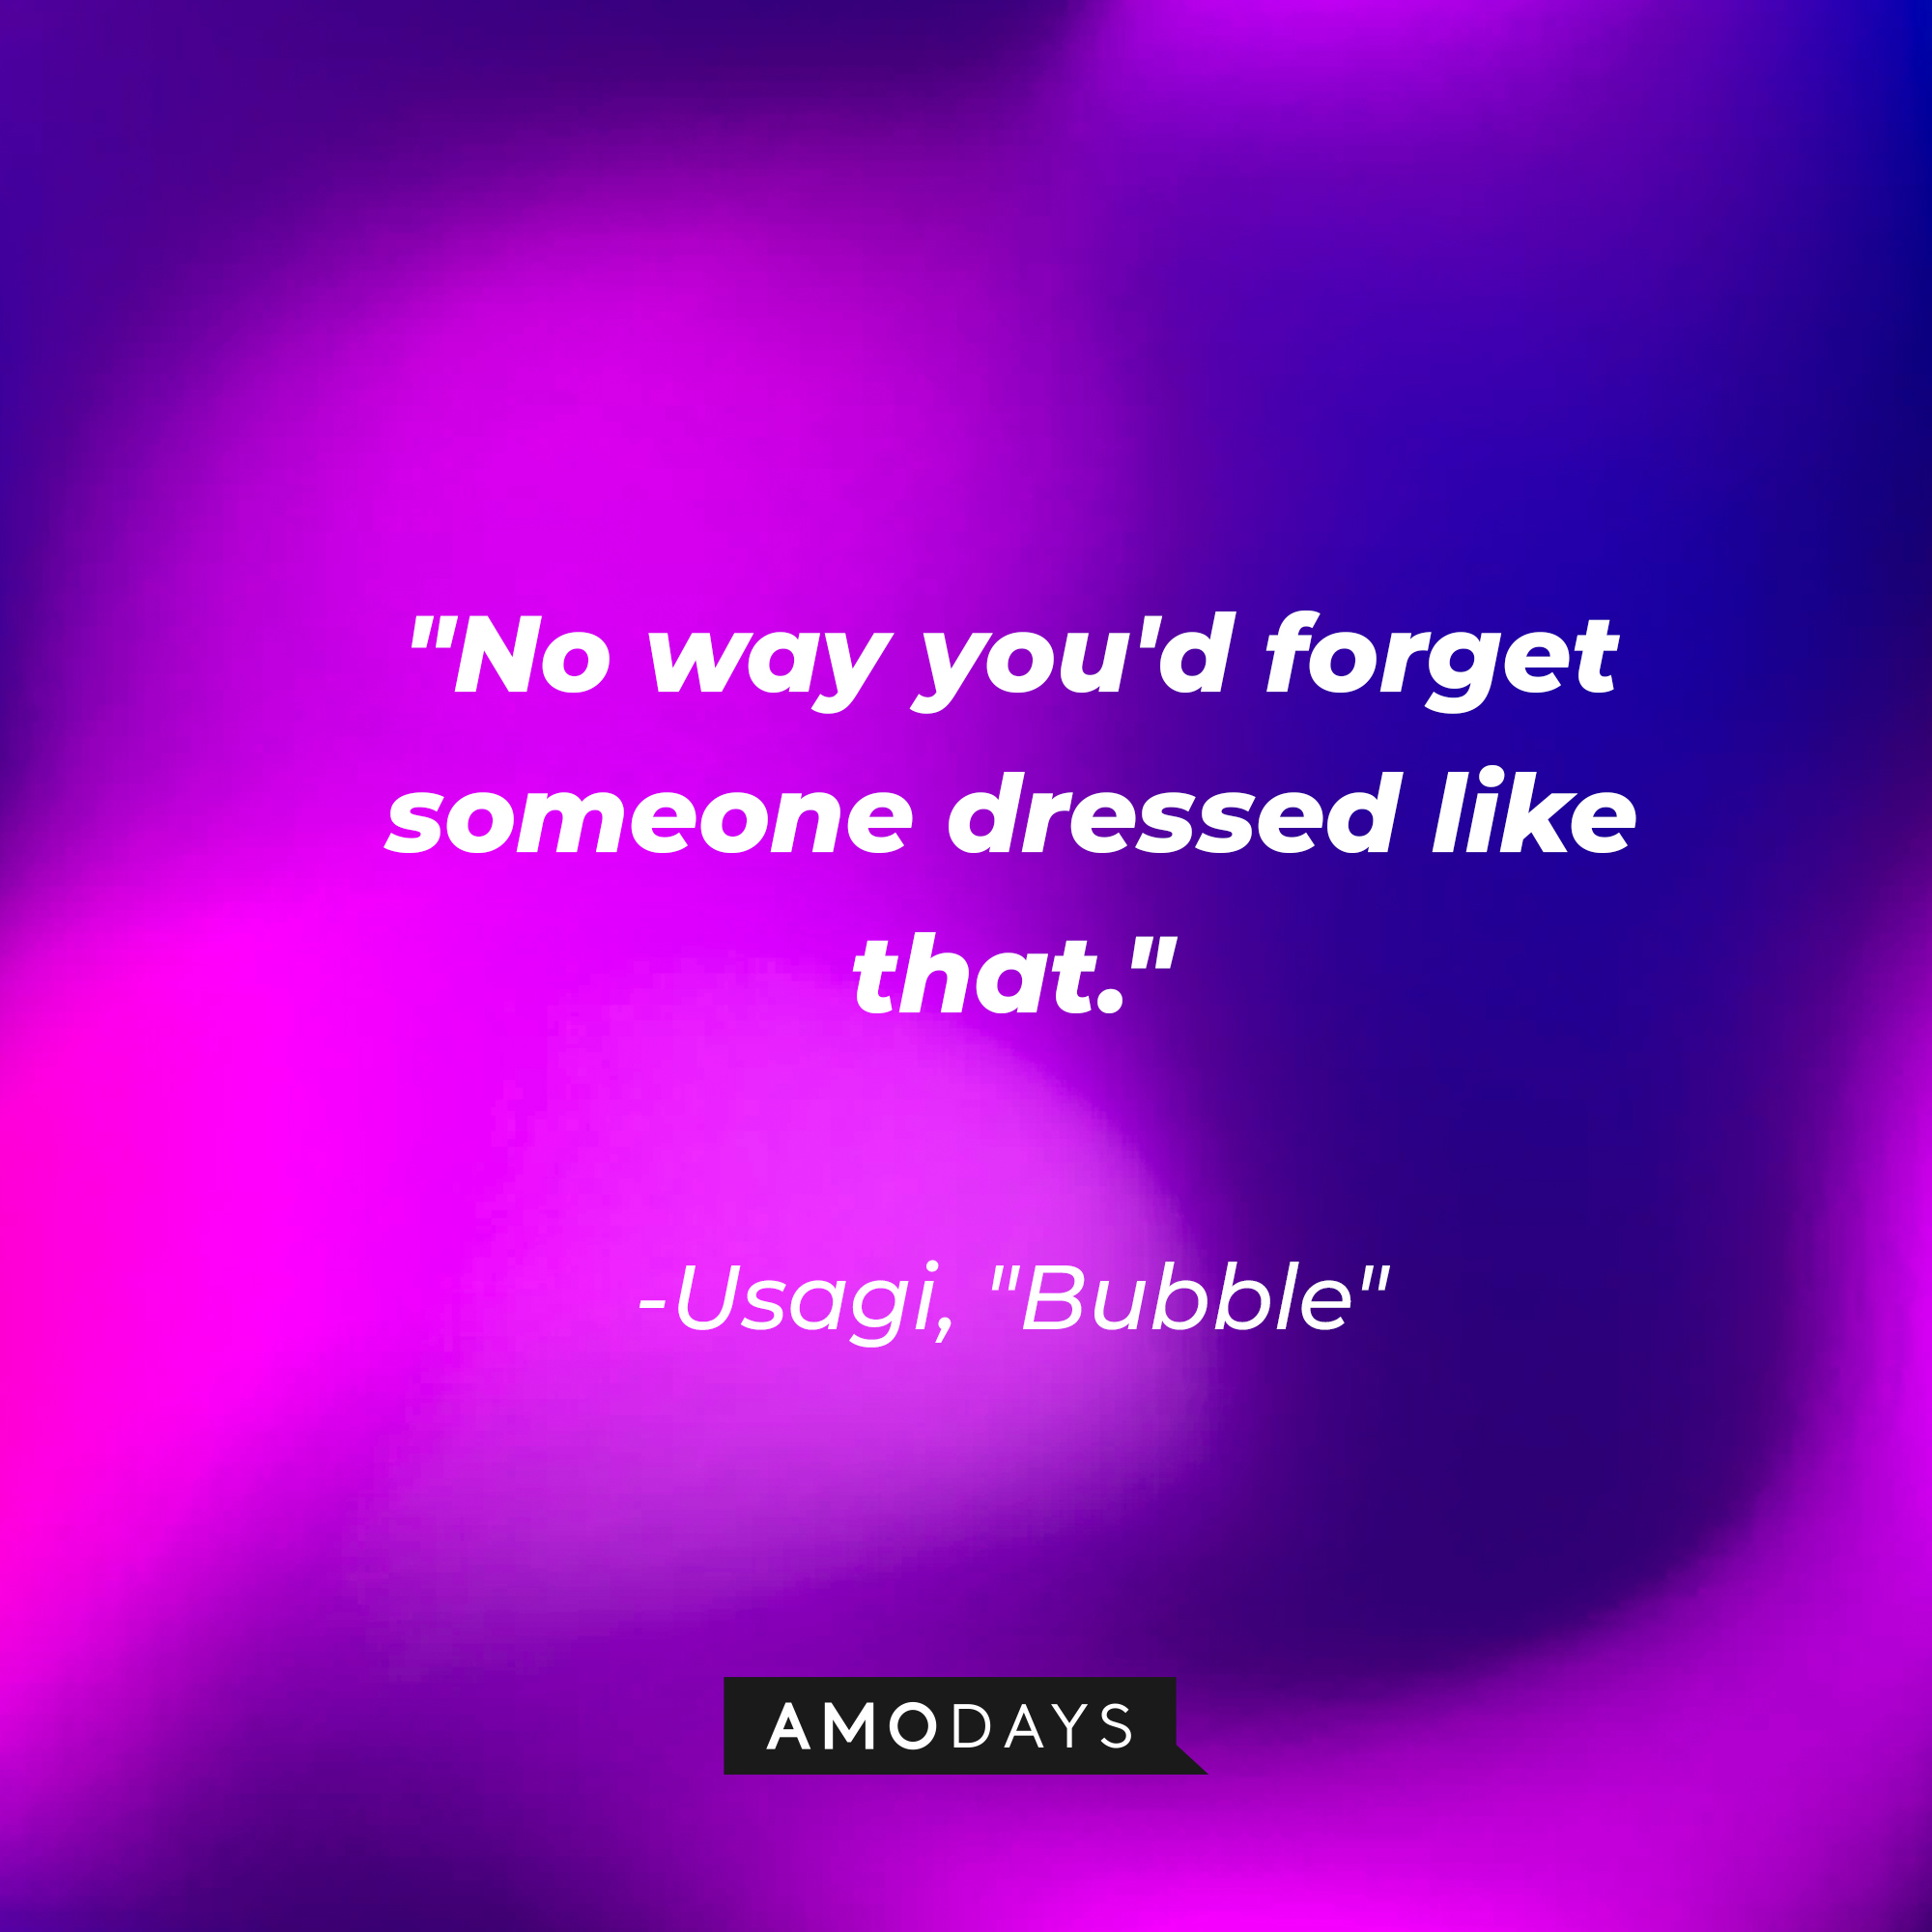 Usagi's quote on "Bubble:" "No way you'd forget someone dressed like that." | Source: AmoDays